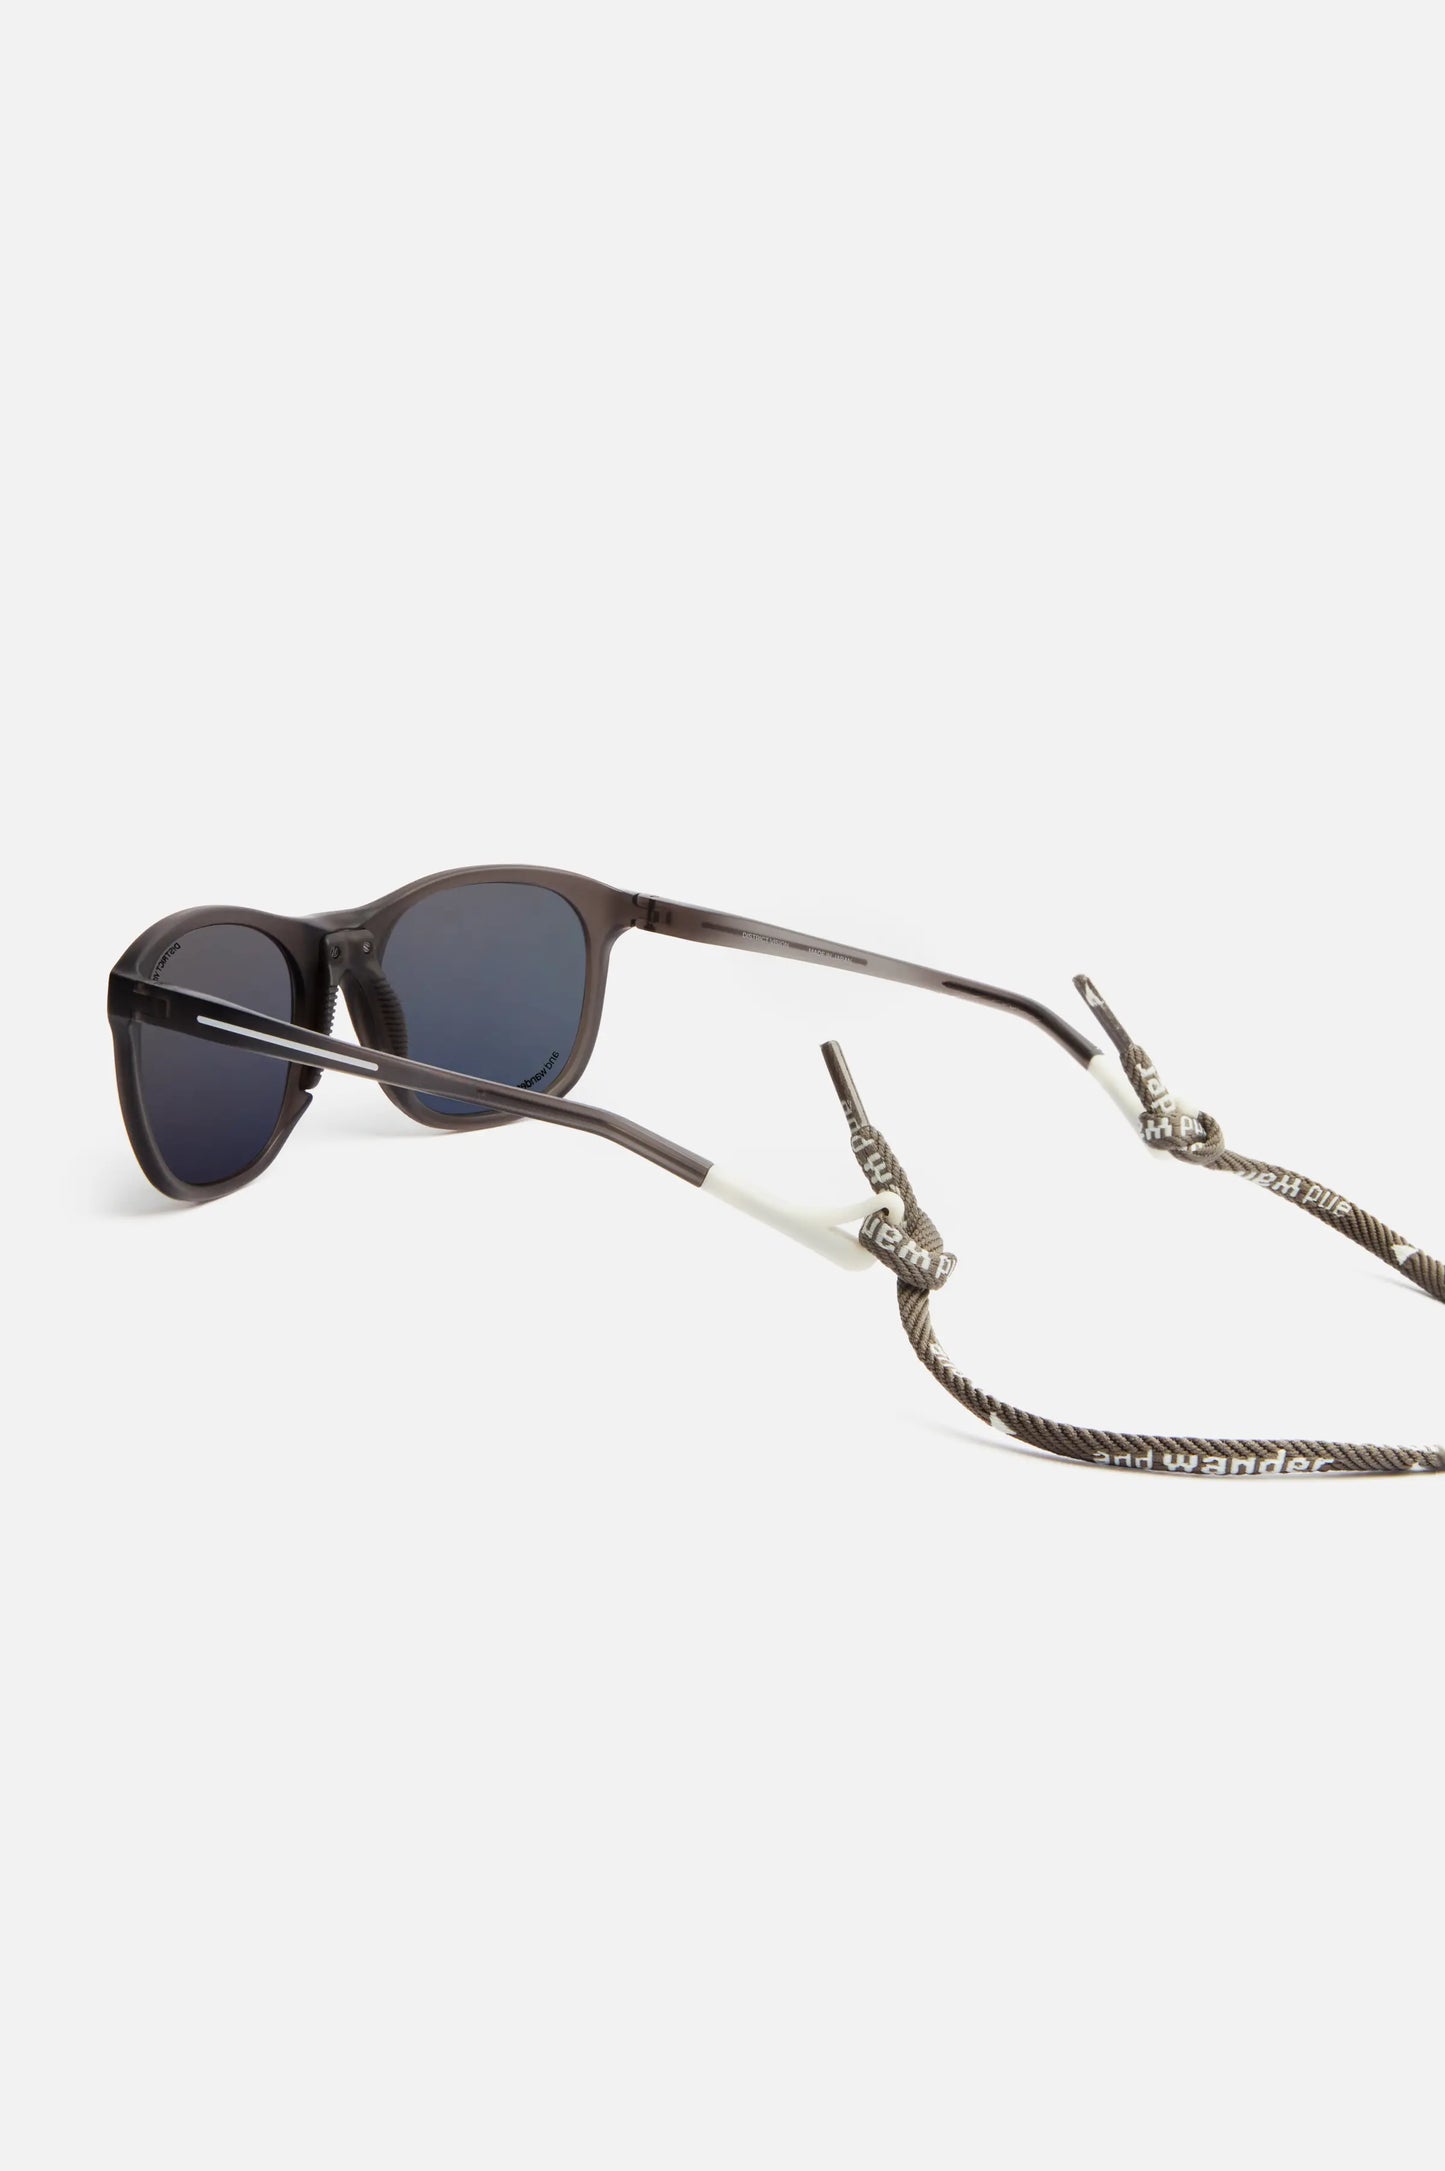 District Vision and wander Nako Multisport Sunglasses in Water Gray